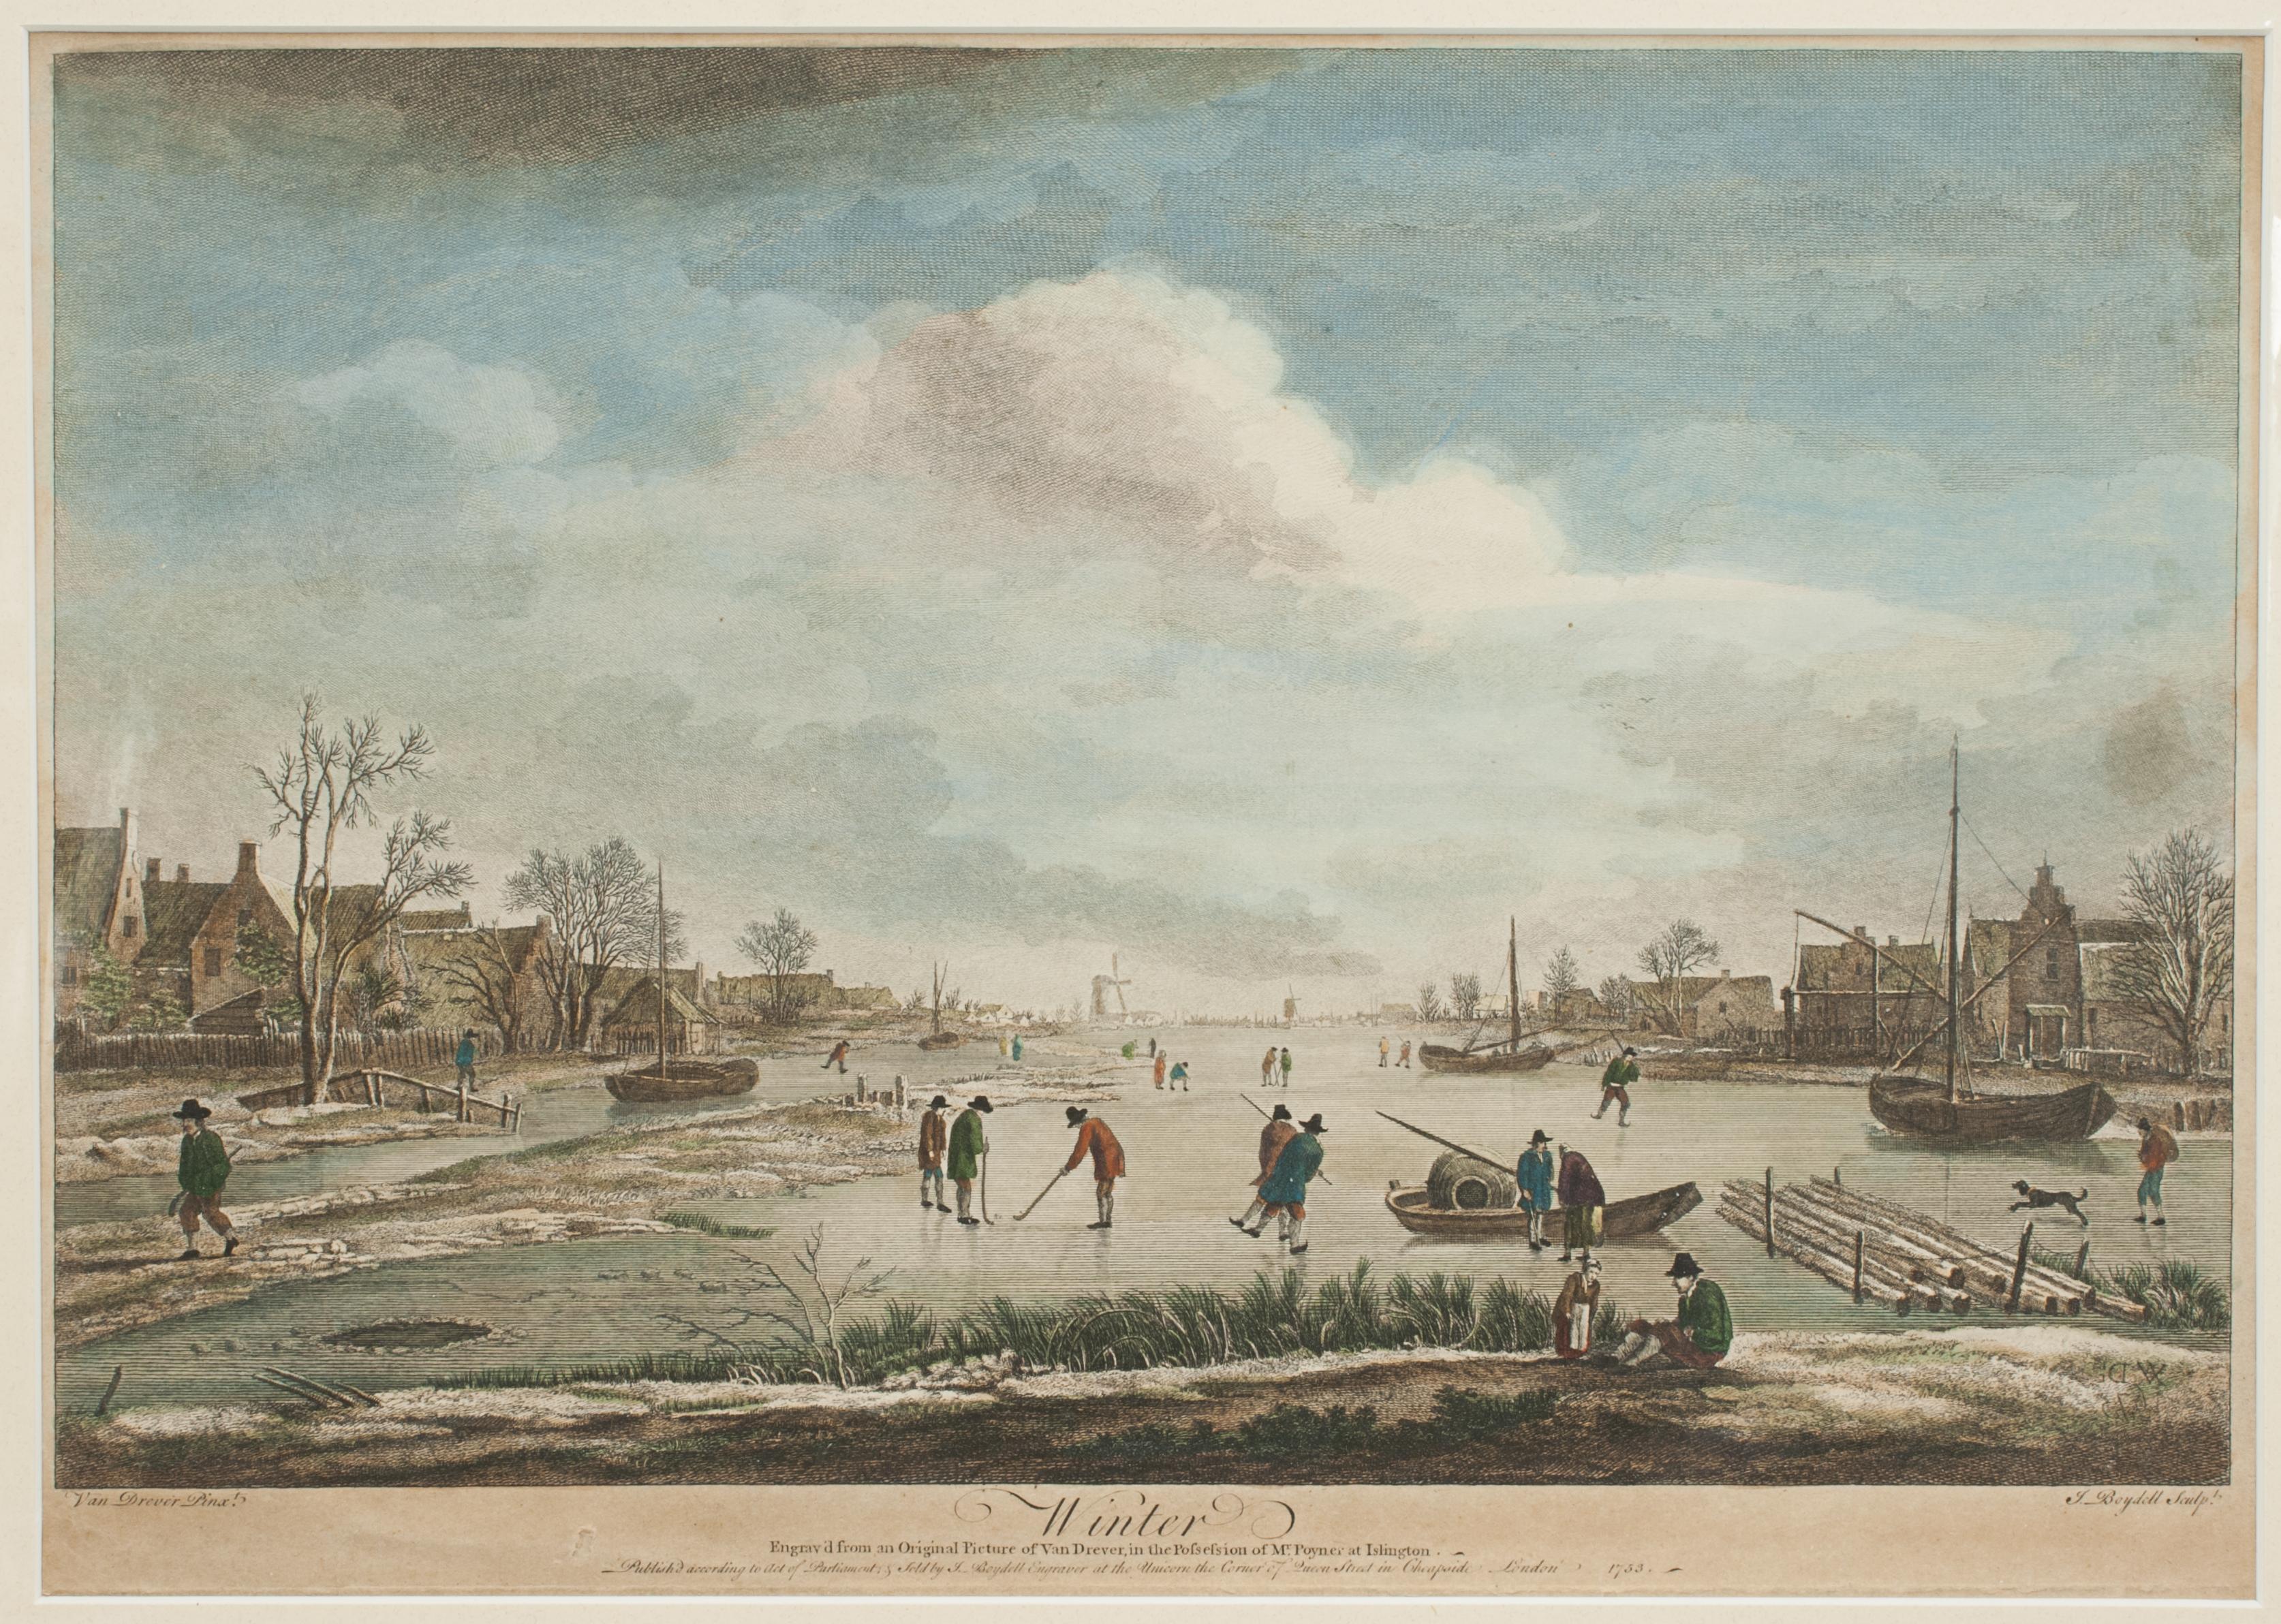 Dutch golf engraving by J. Boydell, Winter.
Rare 18th century Dutch golf engraving by J. Boydell depicting Dutchman playing the early form of golf on the ice, titled 'Winter'. The scene shows a group of three Dutch gentlemen in the foreground